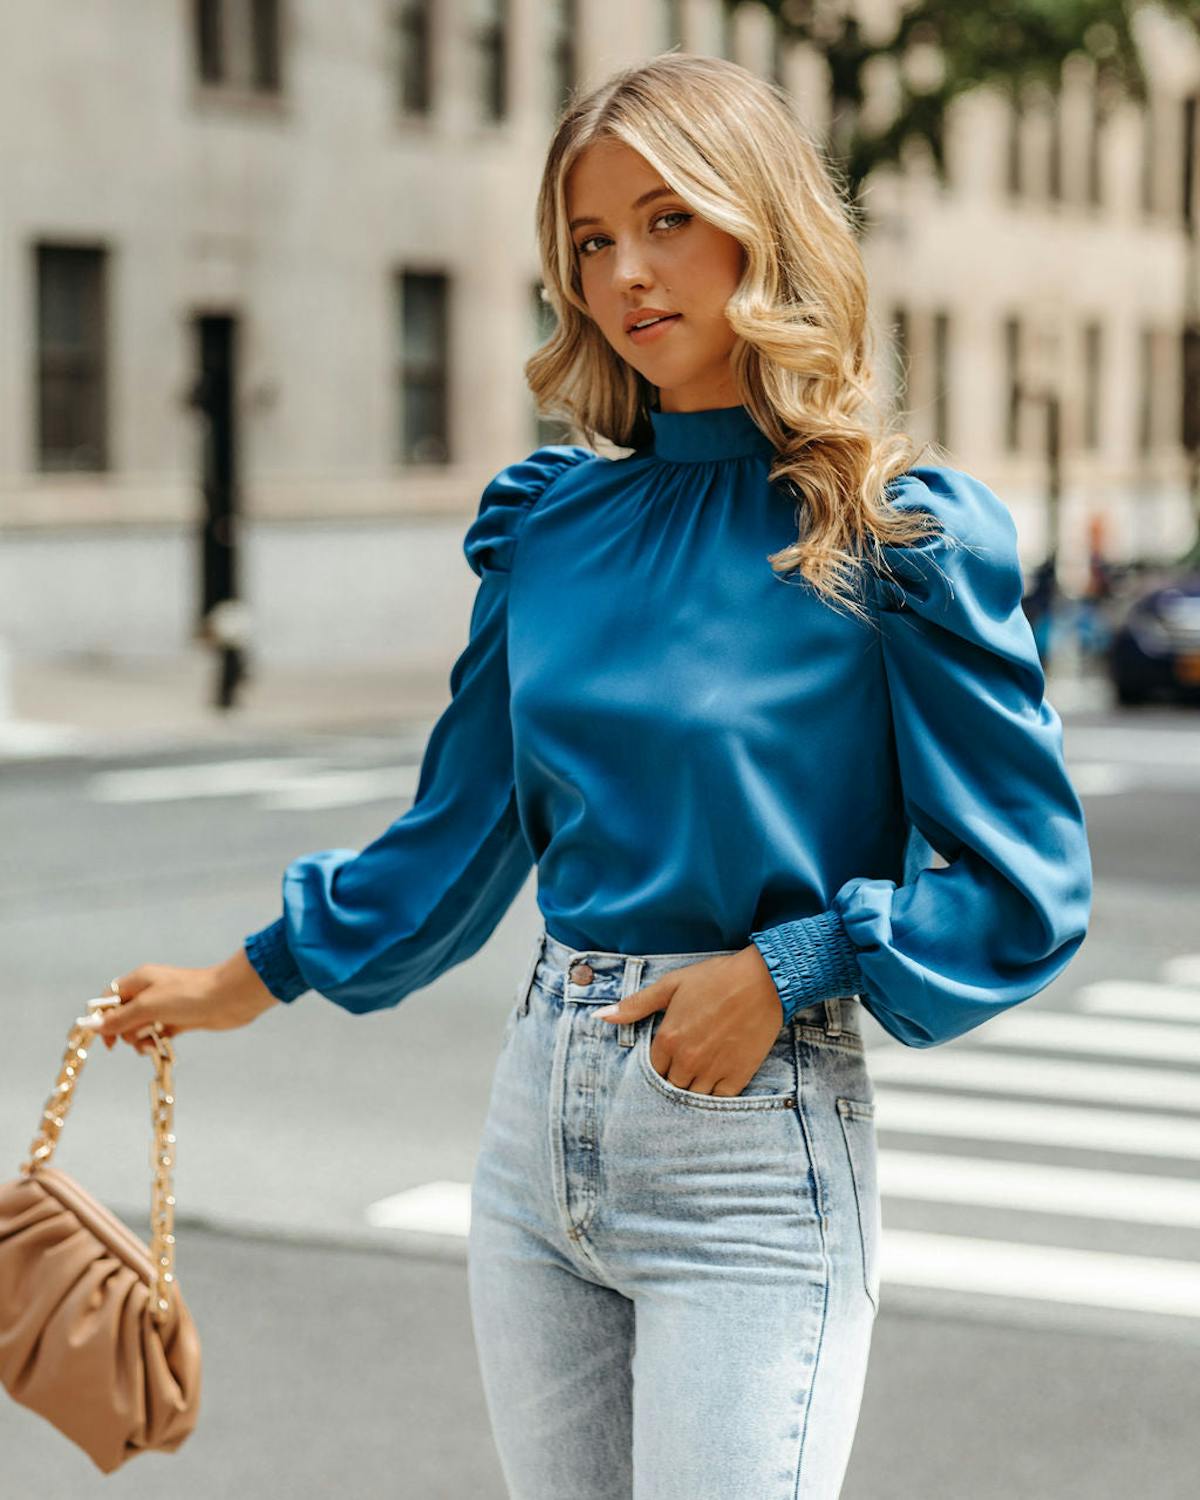 Go Getter Statement Sleeve Blouse - Blue - FINAL SALE view 1